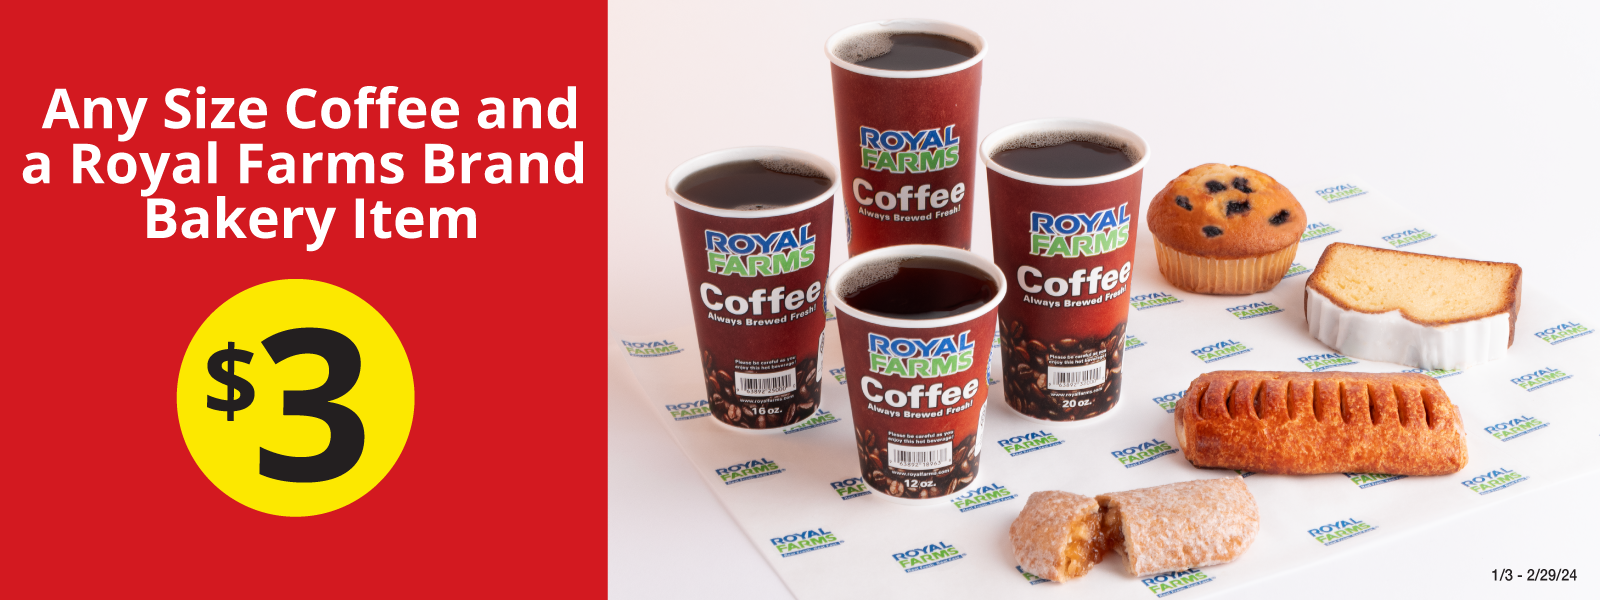 Royal Farms Promo – Any Size Coffee and A Royal Farms Brand Bakery Item